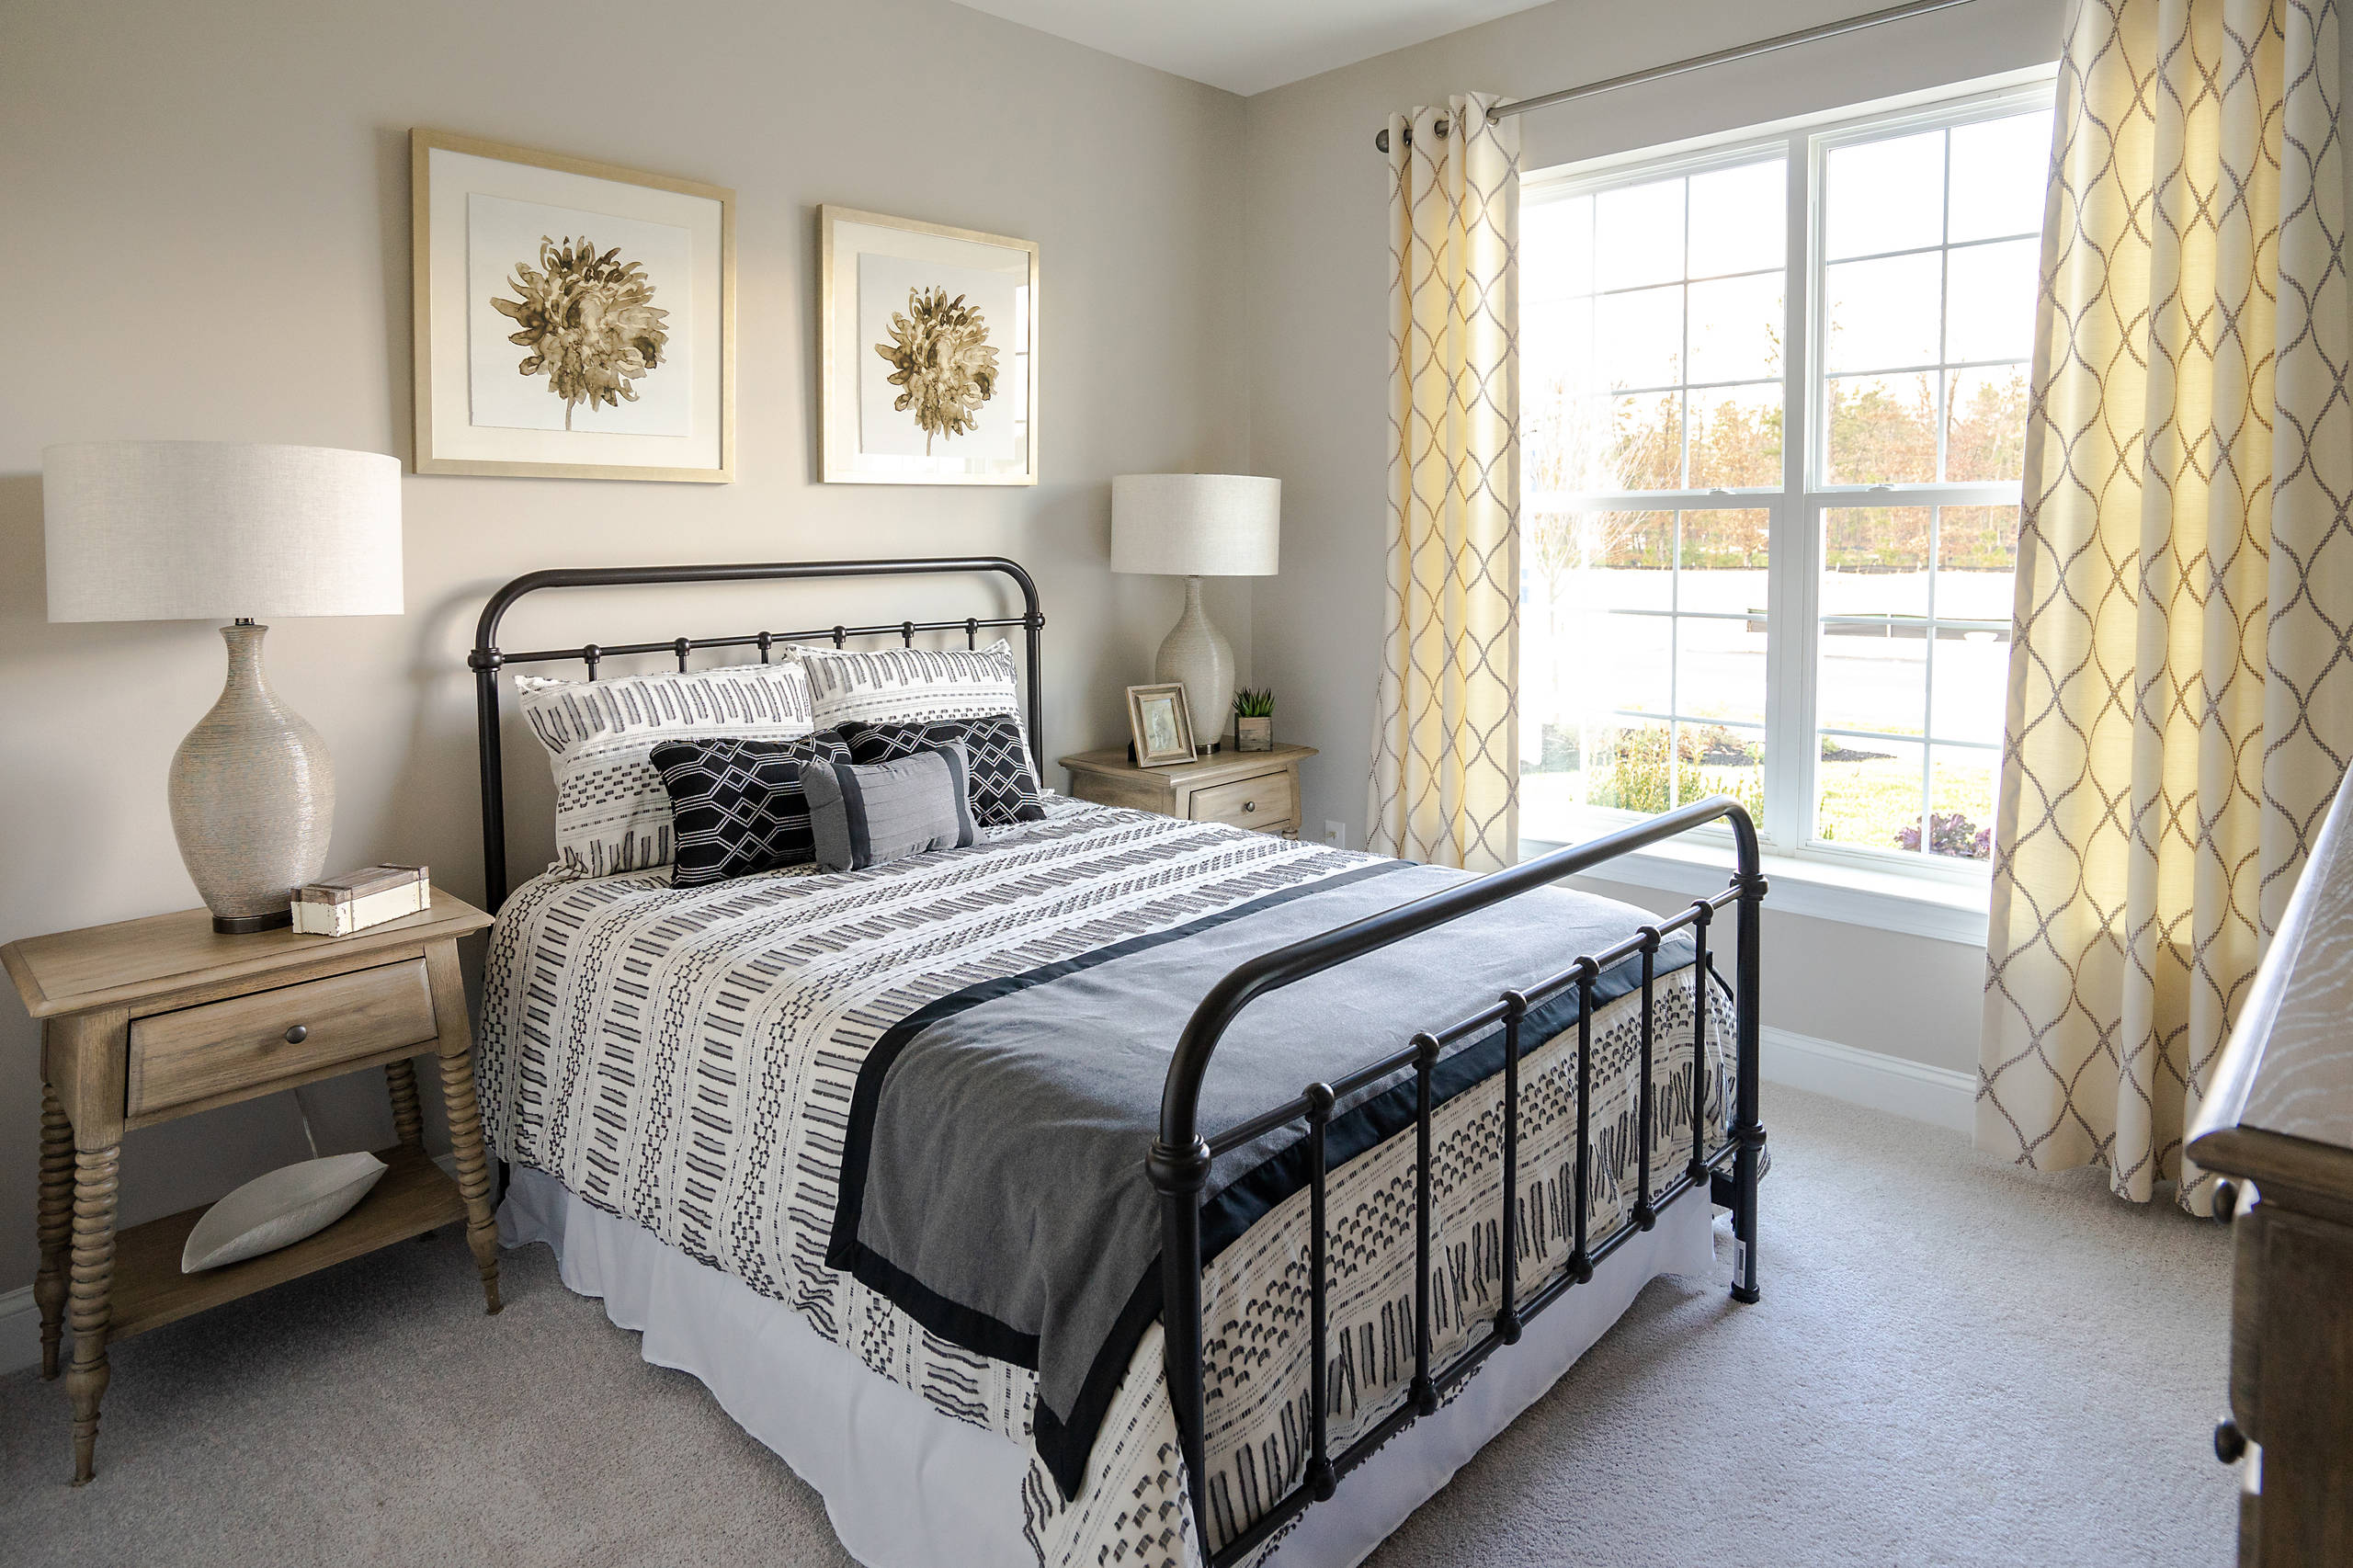 75 Beautiful Farmhouse Guest Bedroom Pictures Ideas July 2021 Houzz